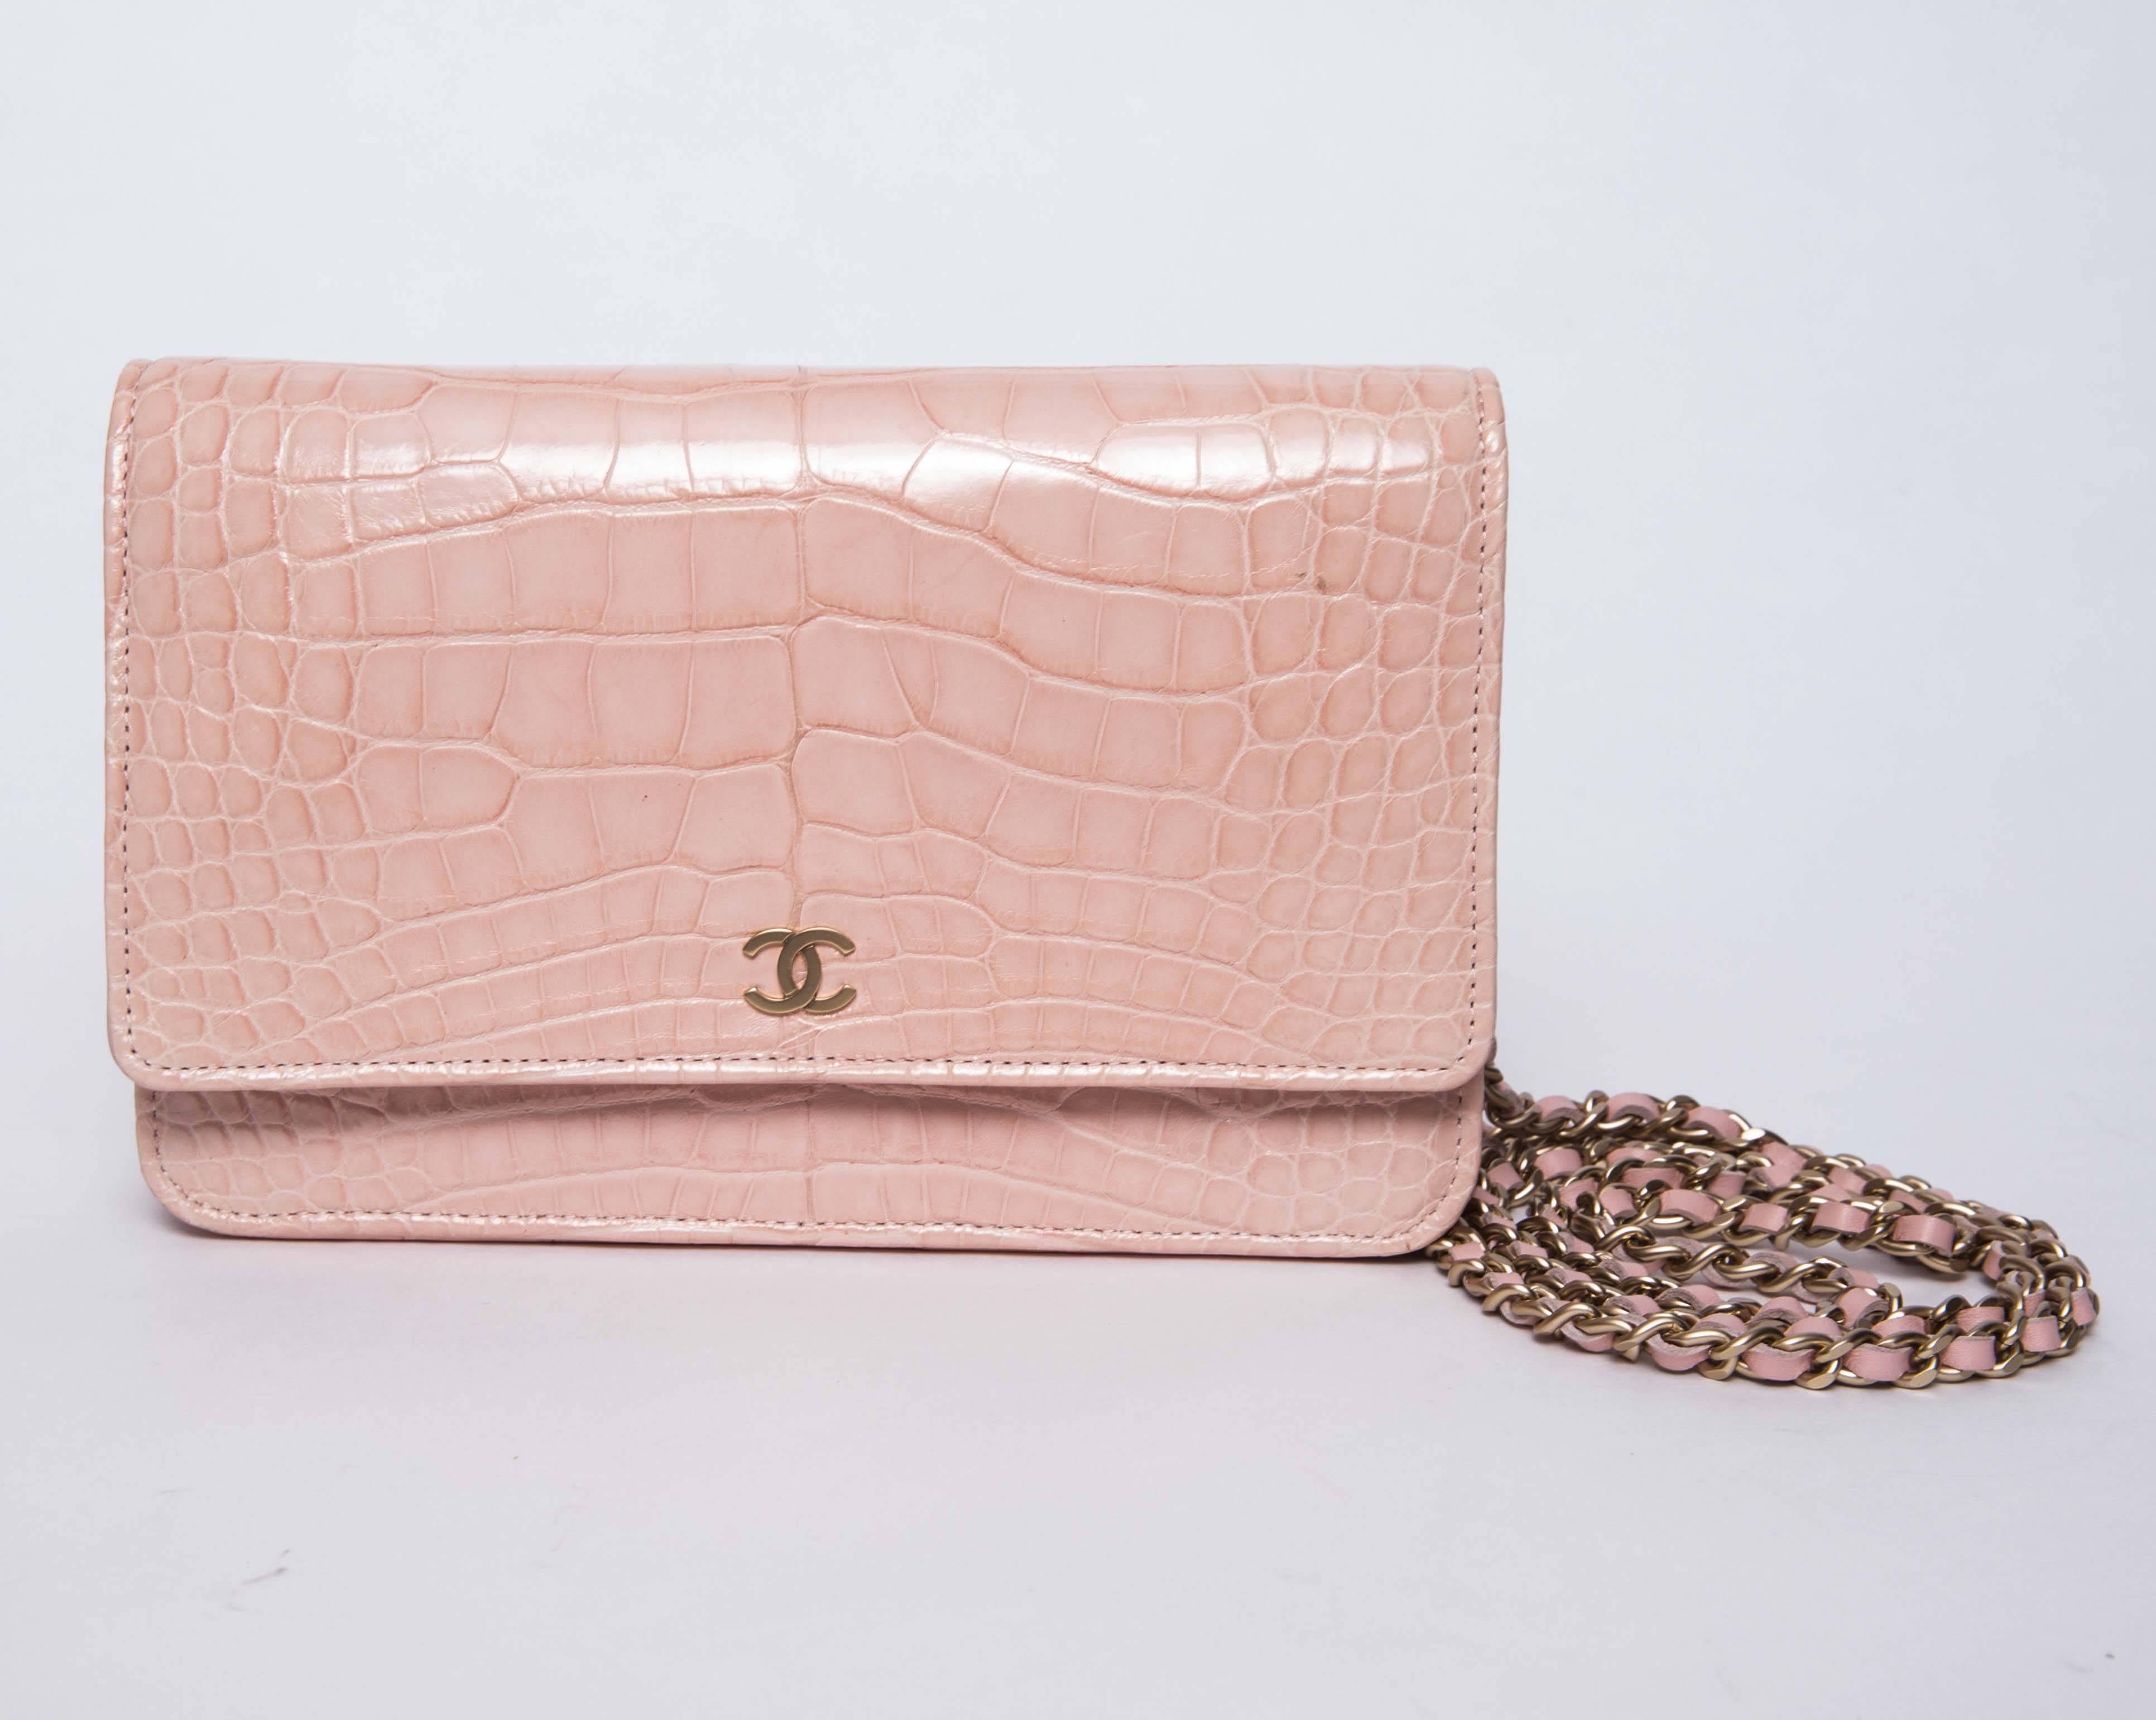  Chanel Blush pink Alligator Chanel Wallet On Chain features gold tone hardware, single shoulder strap with chain link cross-body strap and CC logo at front. Single pocket at interior wall with zip closure,  pocket at flap with zip closure,  three